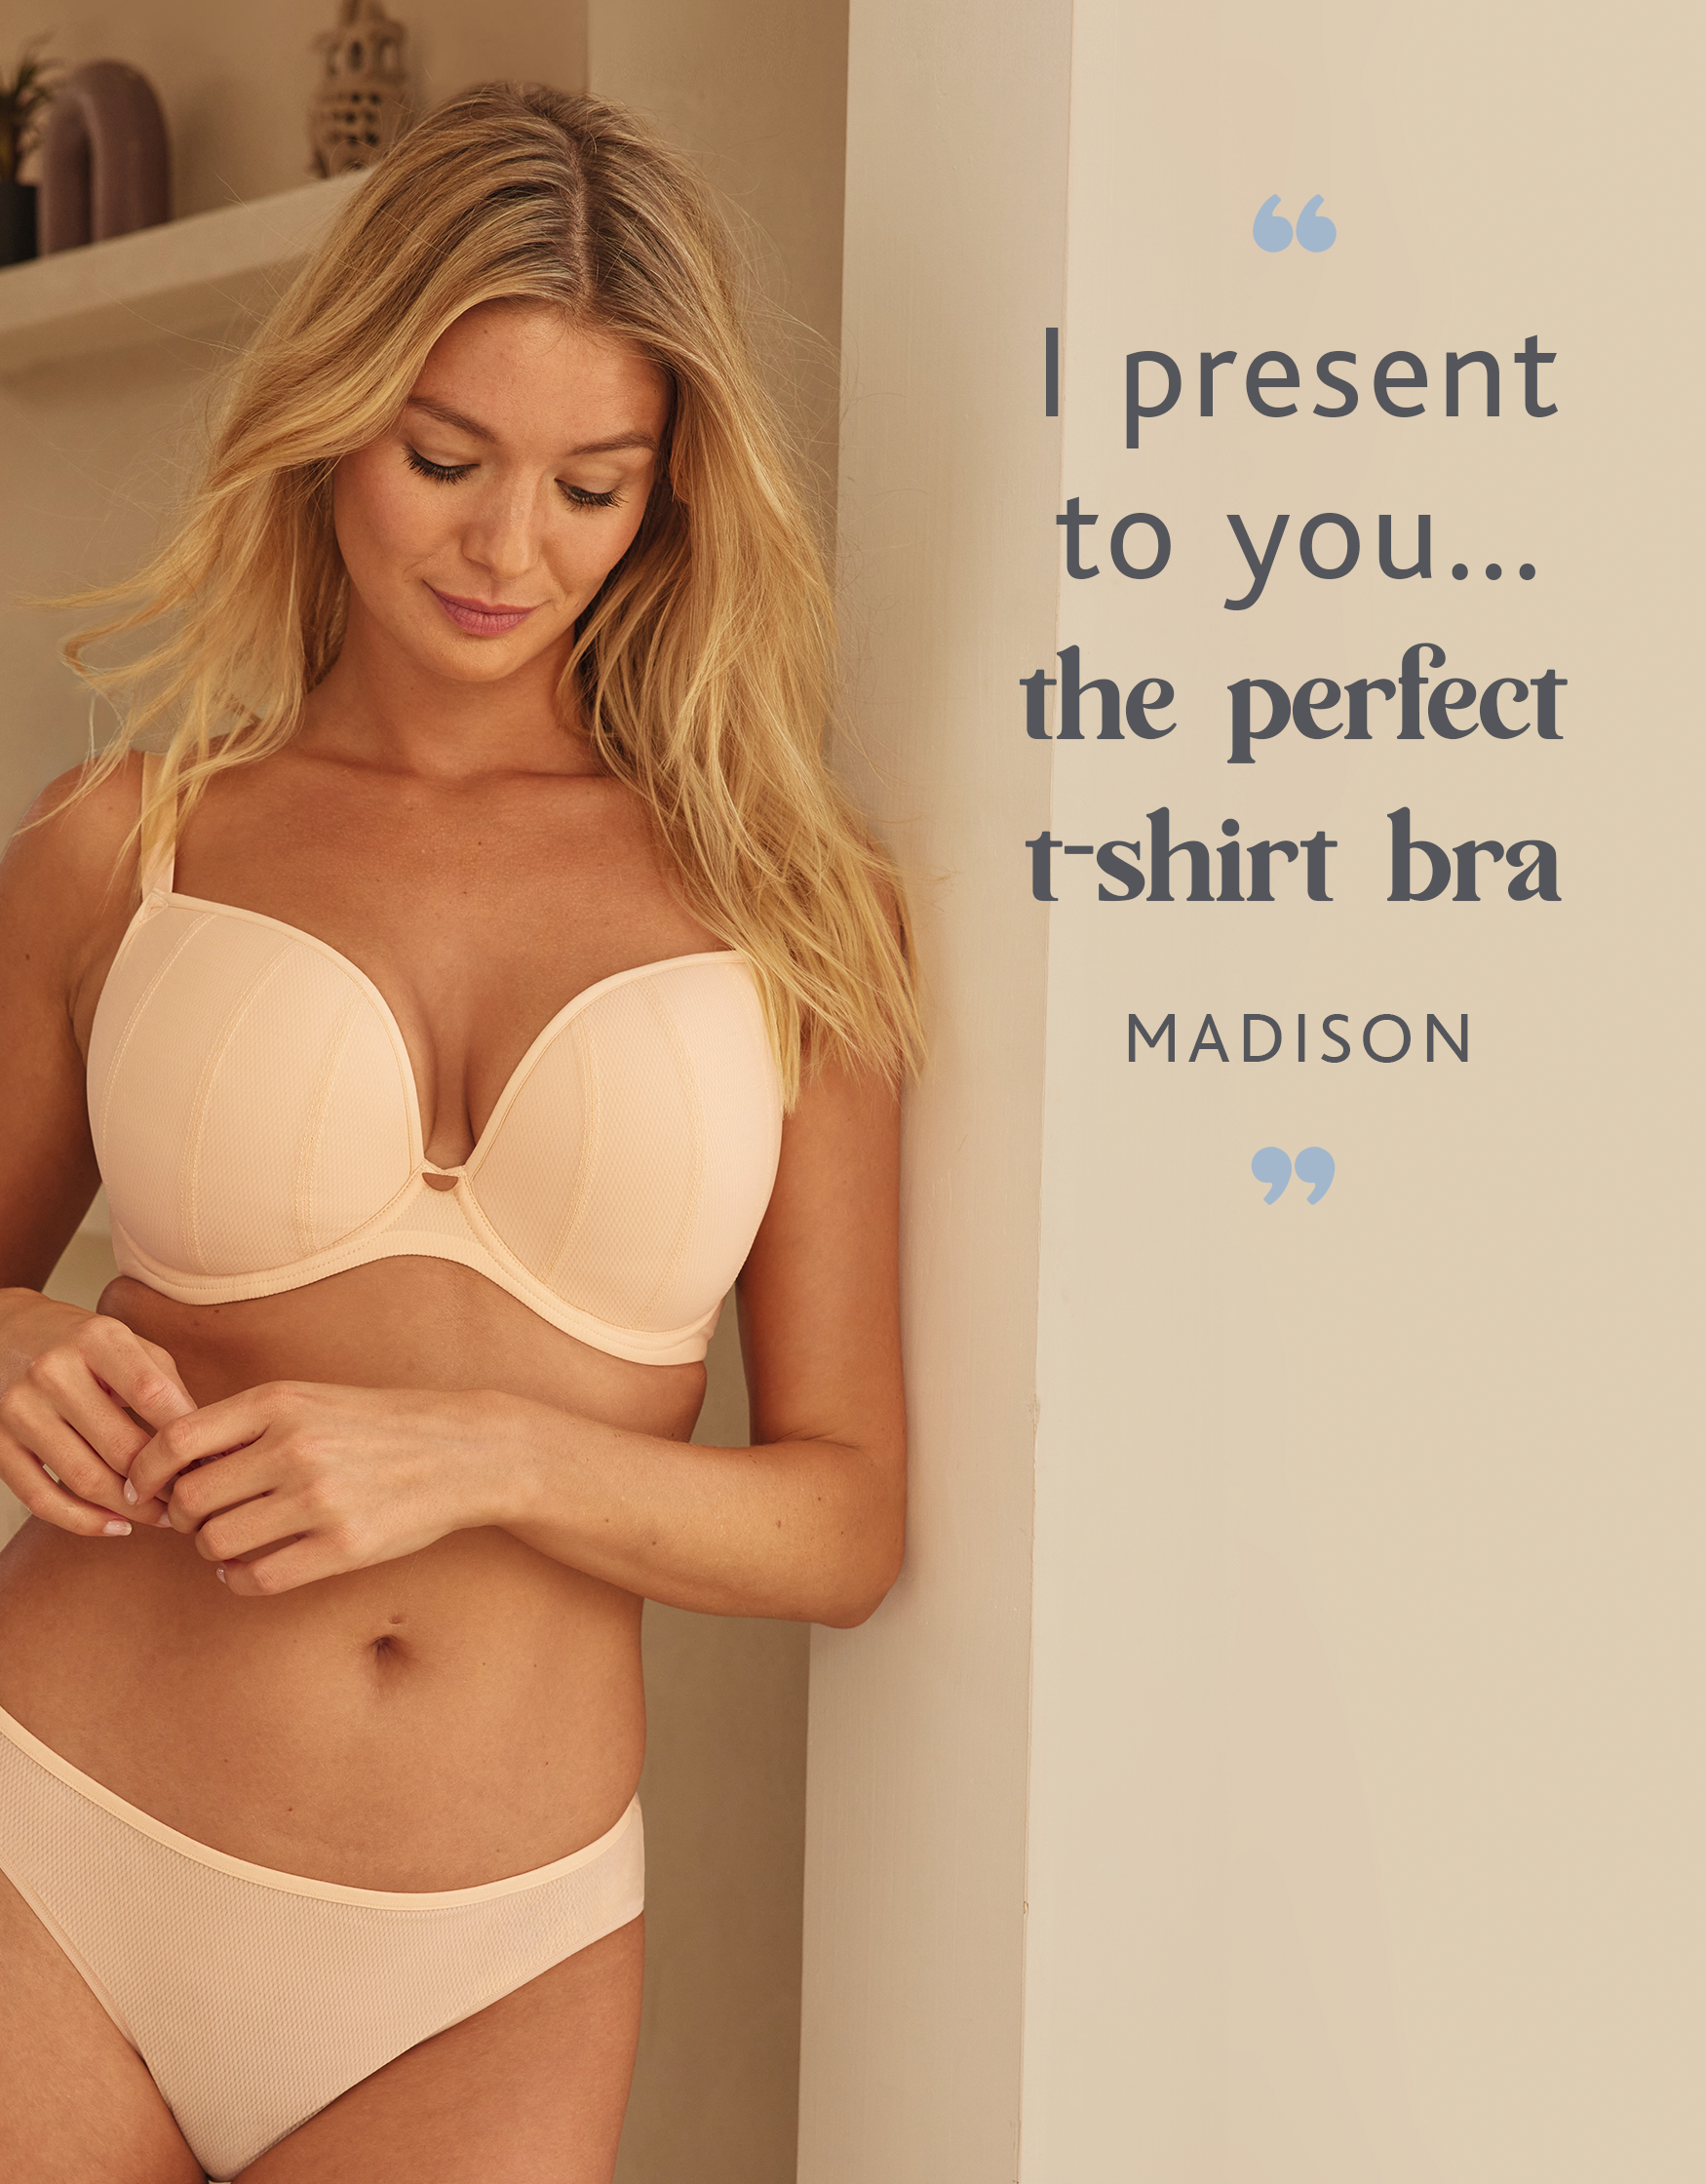 My new favourite bra - it's a game changer! - Bravissimo Email Archive